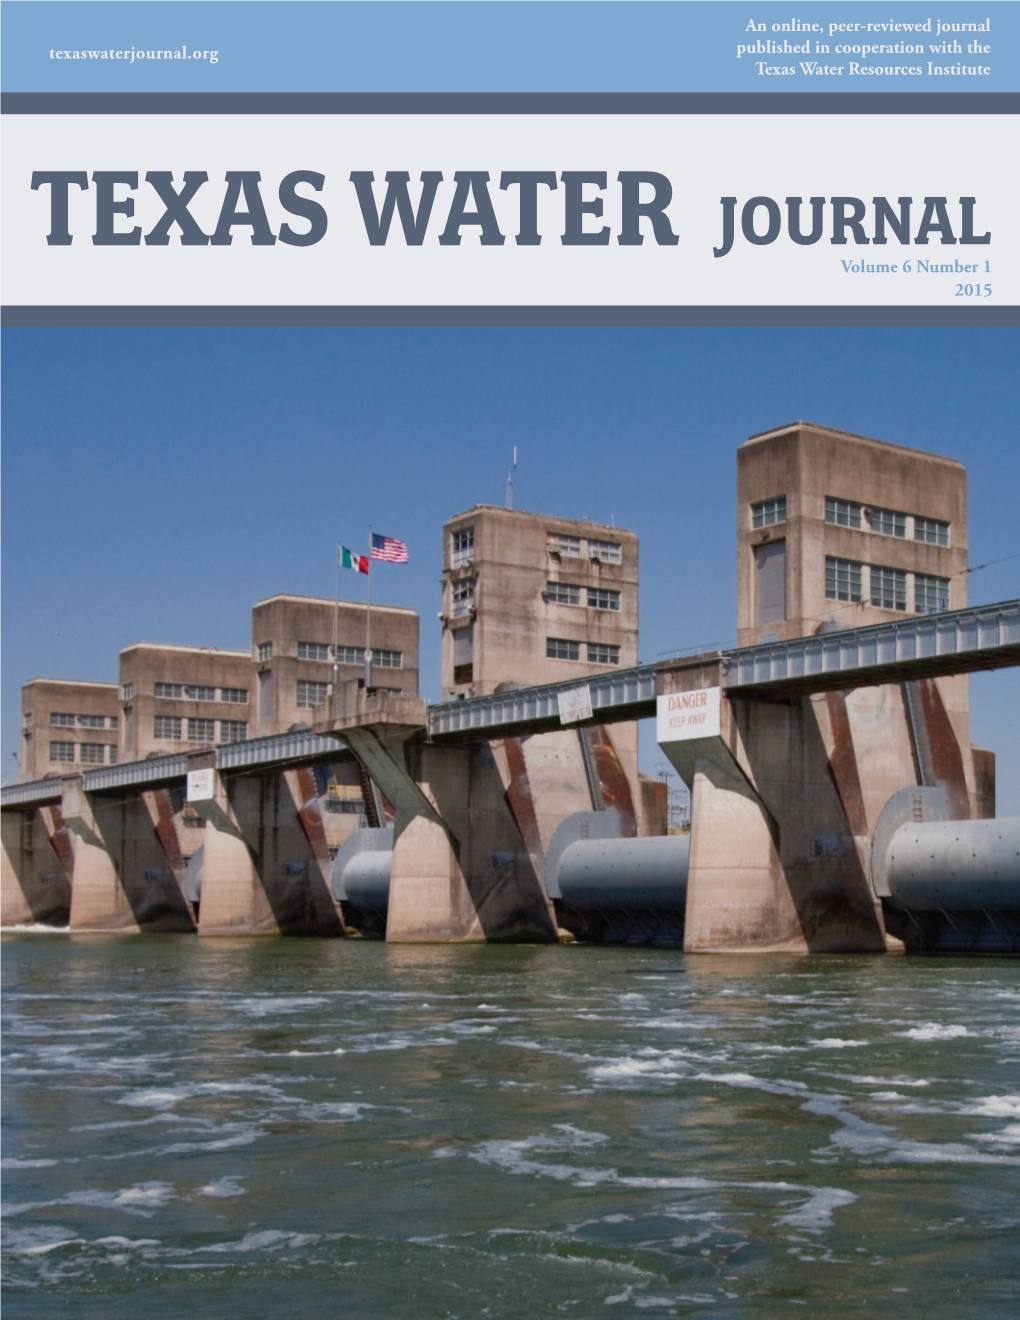 Spatial and Temporal Effects of the Rincon Bayou Pipeline on Hypersaline Conditions in the Lower Nueces Delta, Texas, USA